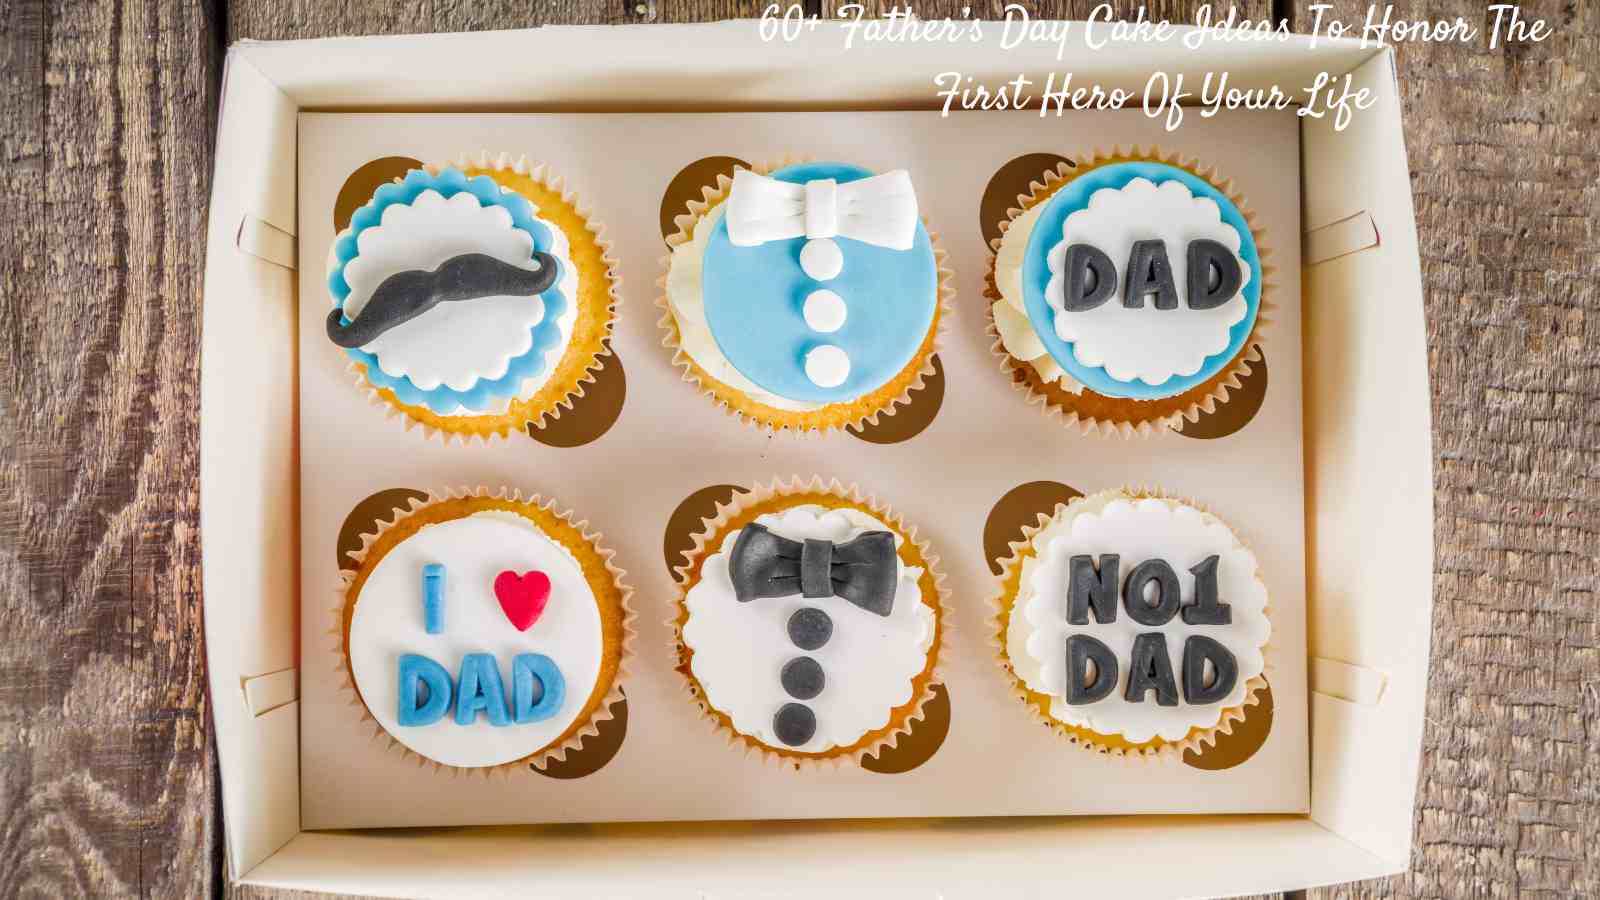 Father’s Day Cake Ideas To Honor The First Hero Of Your Life